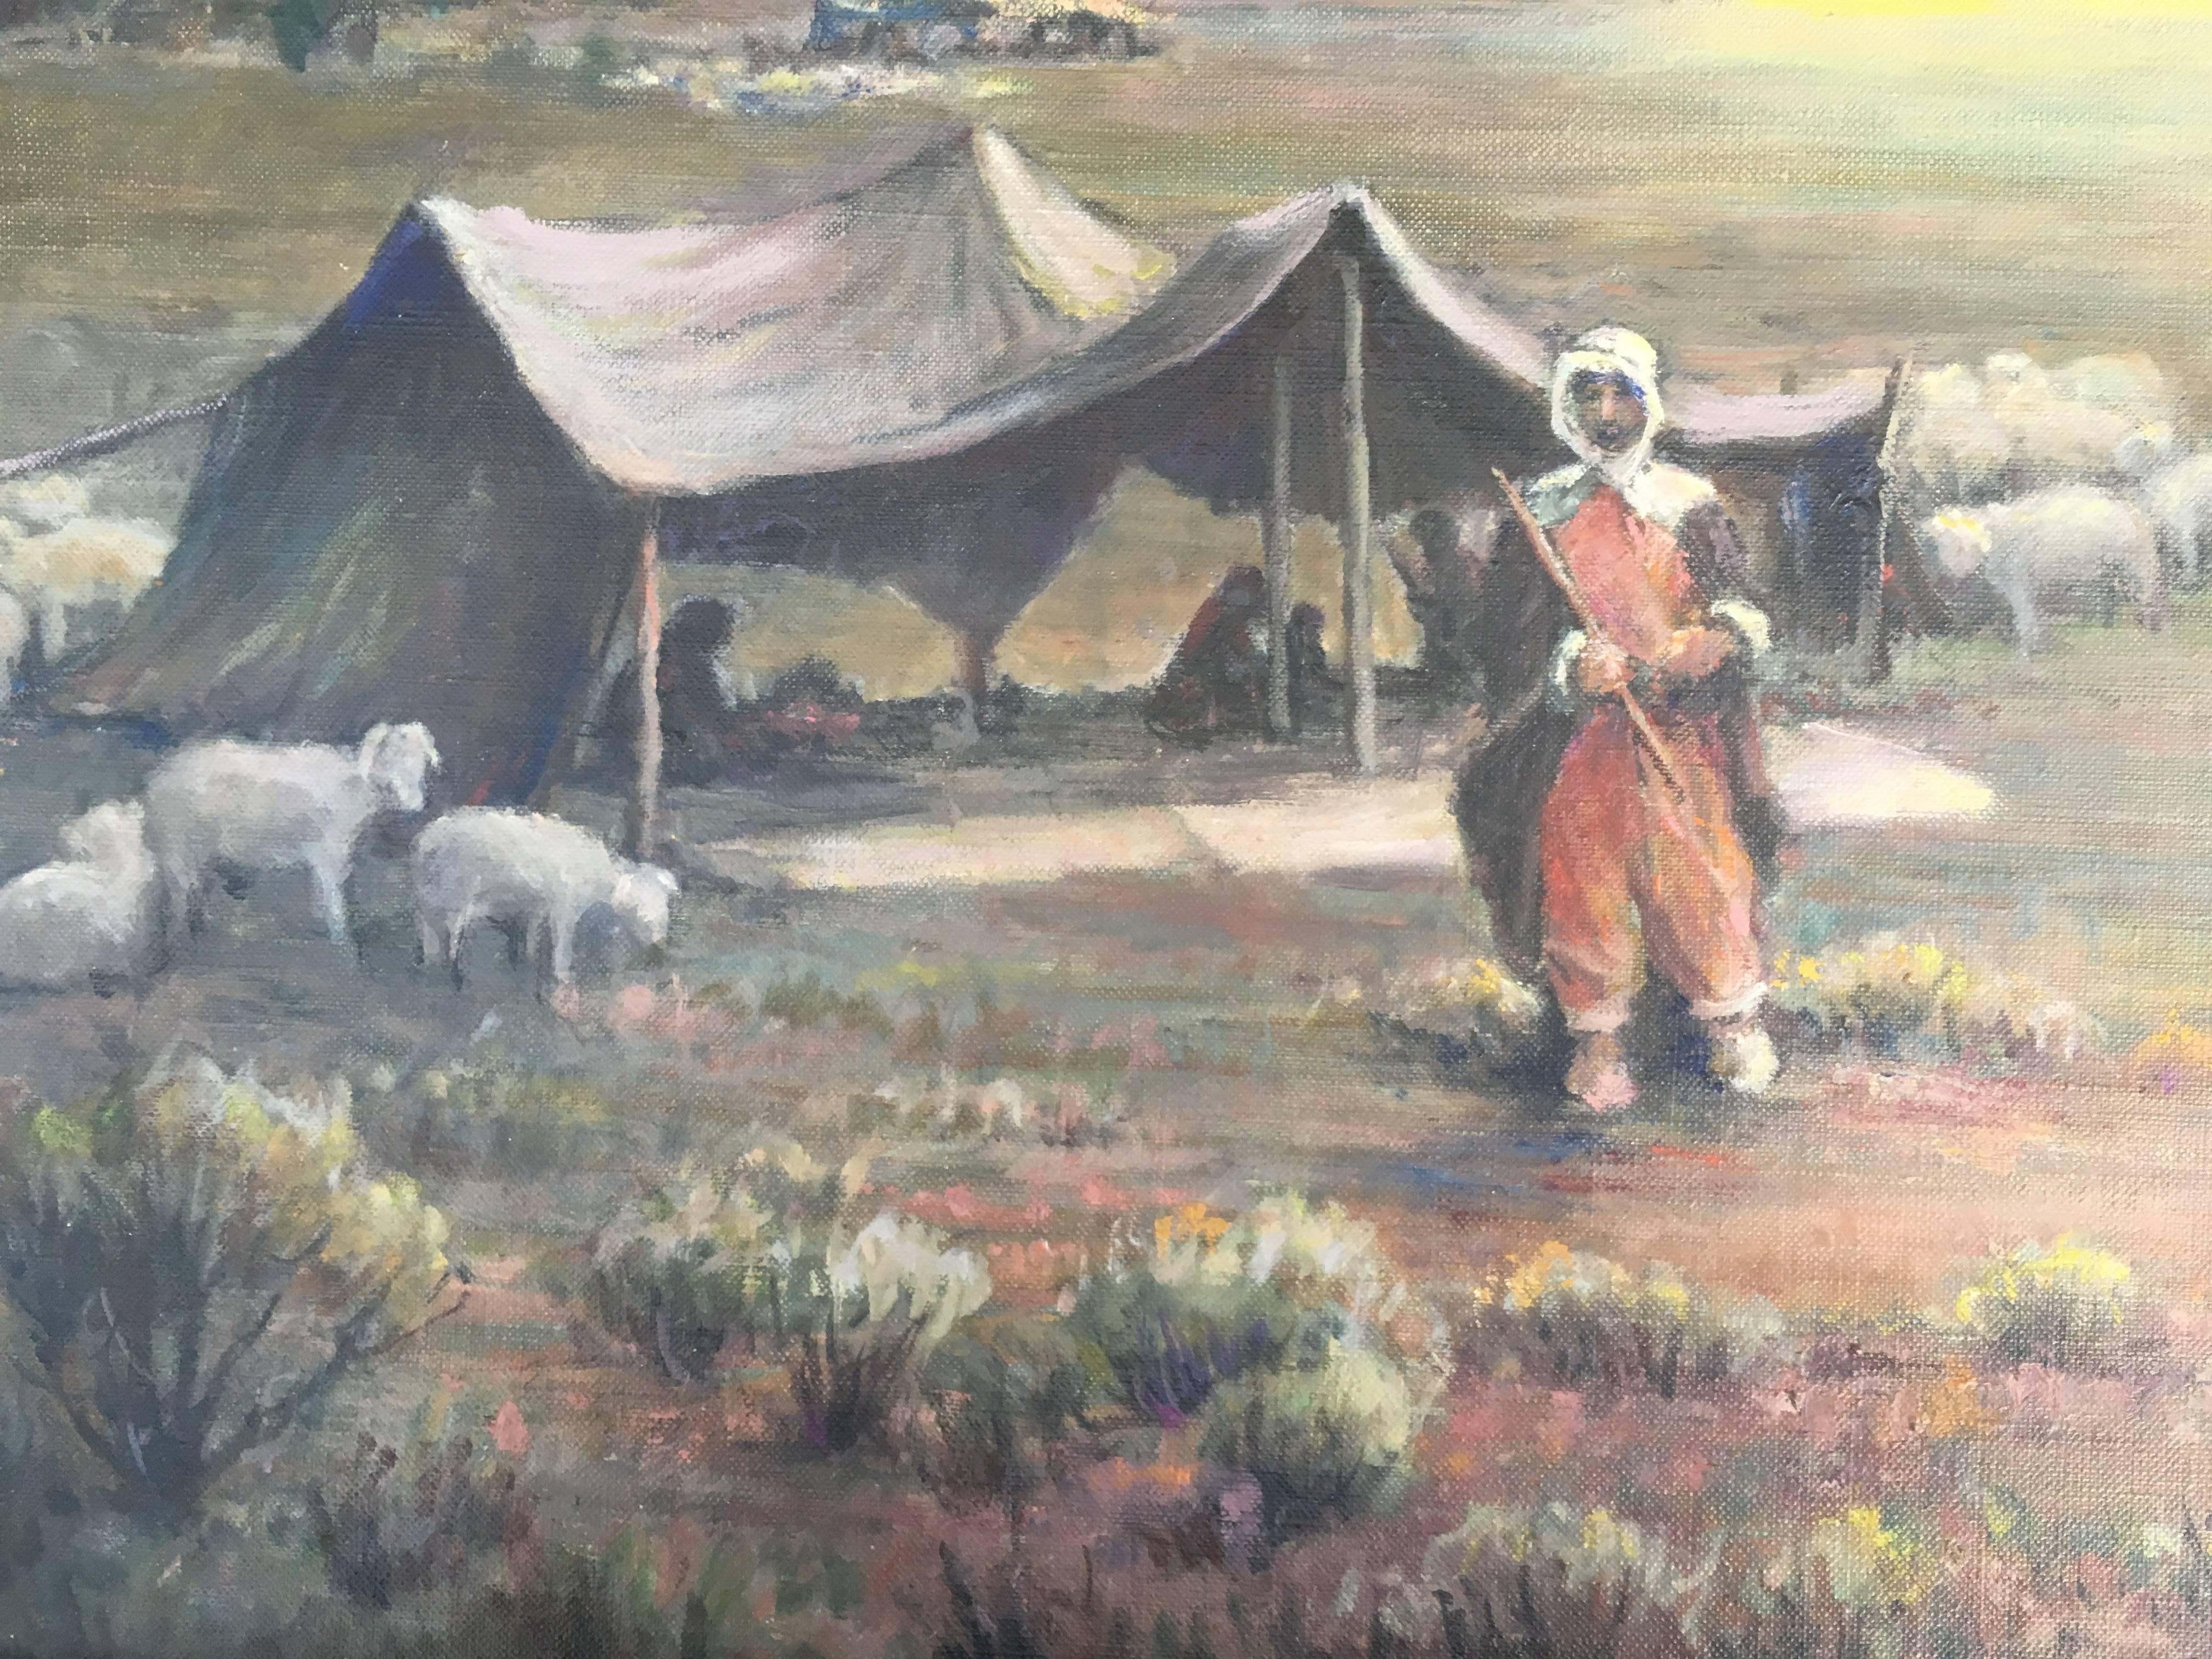 Nomads in the Holy Land Tending Their Flock of Sheep - Painting by Evylyna Nunn Miller